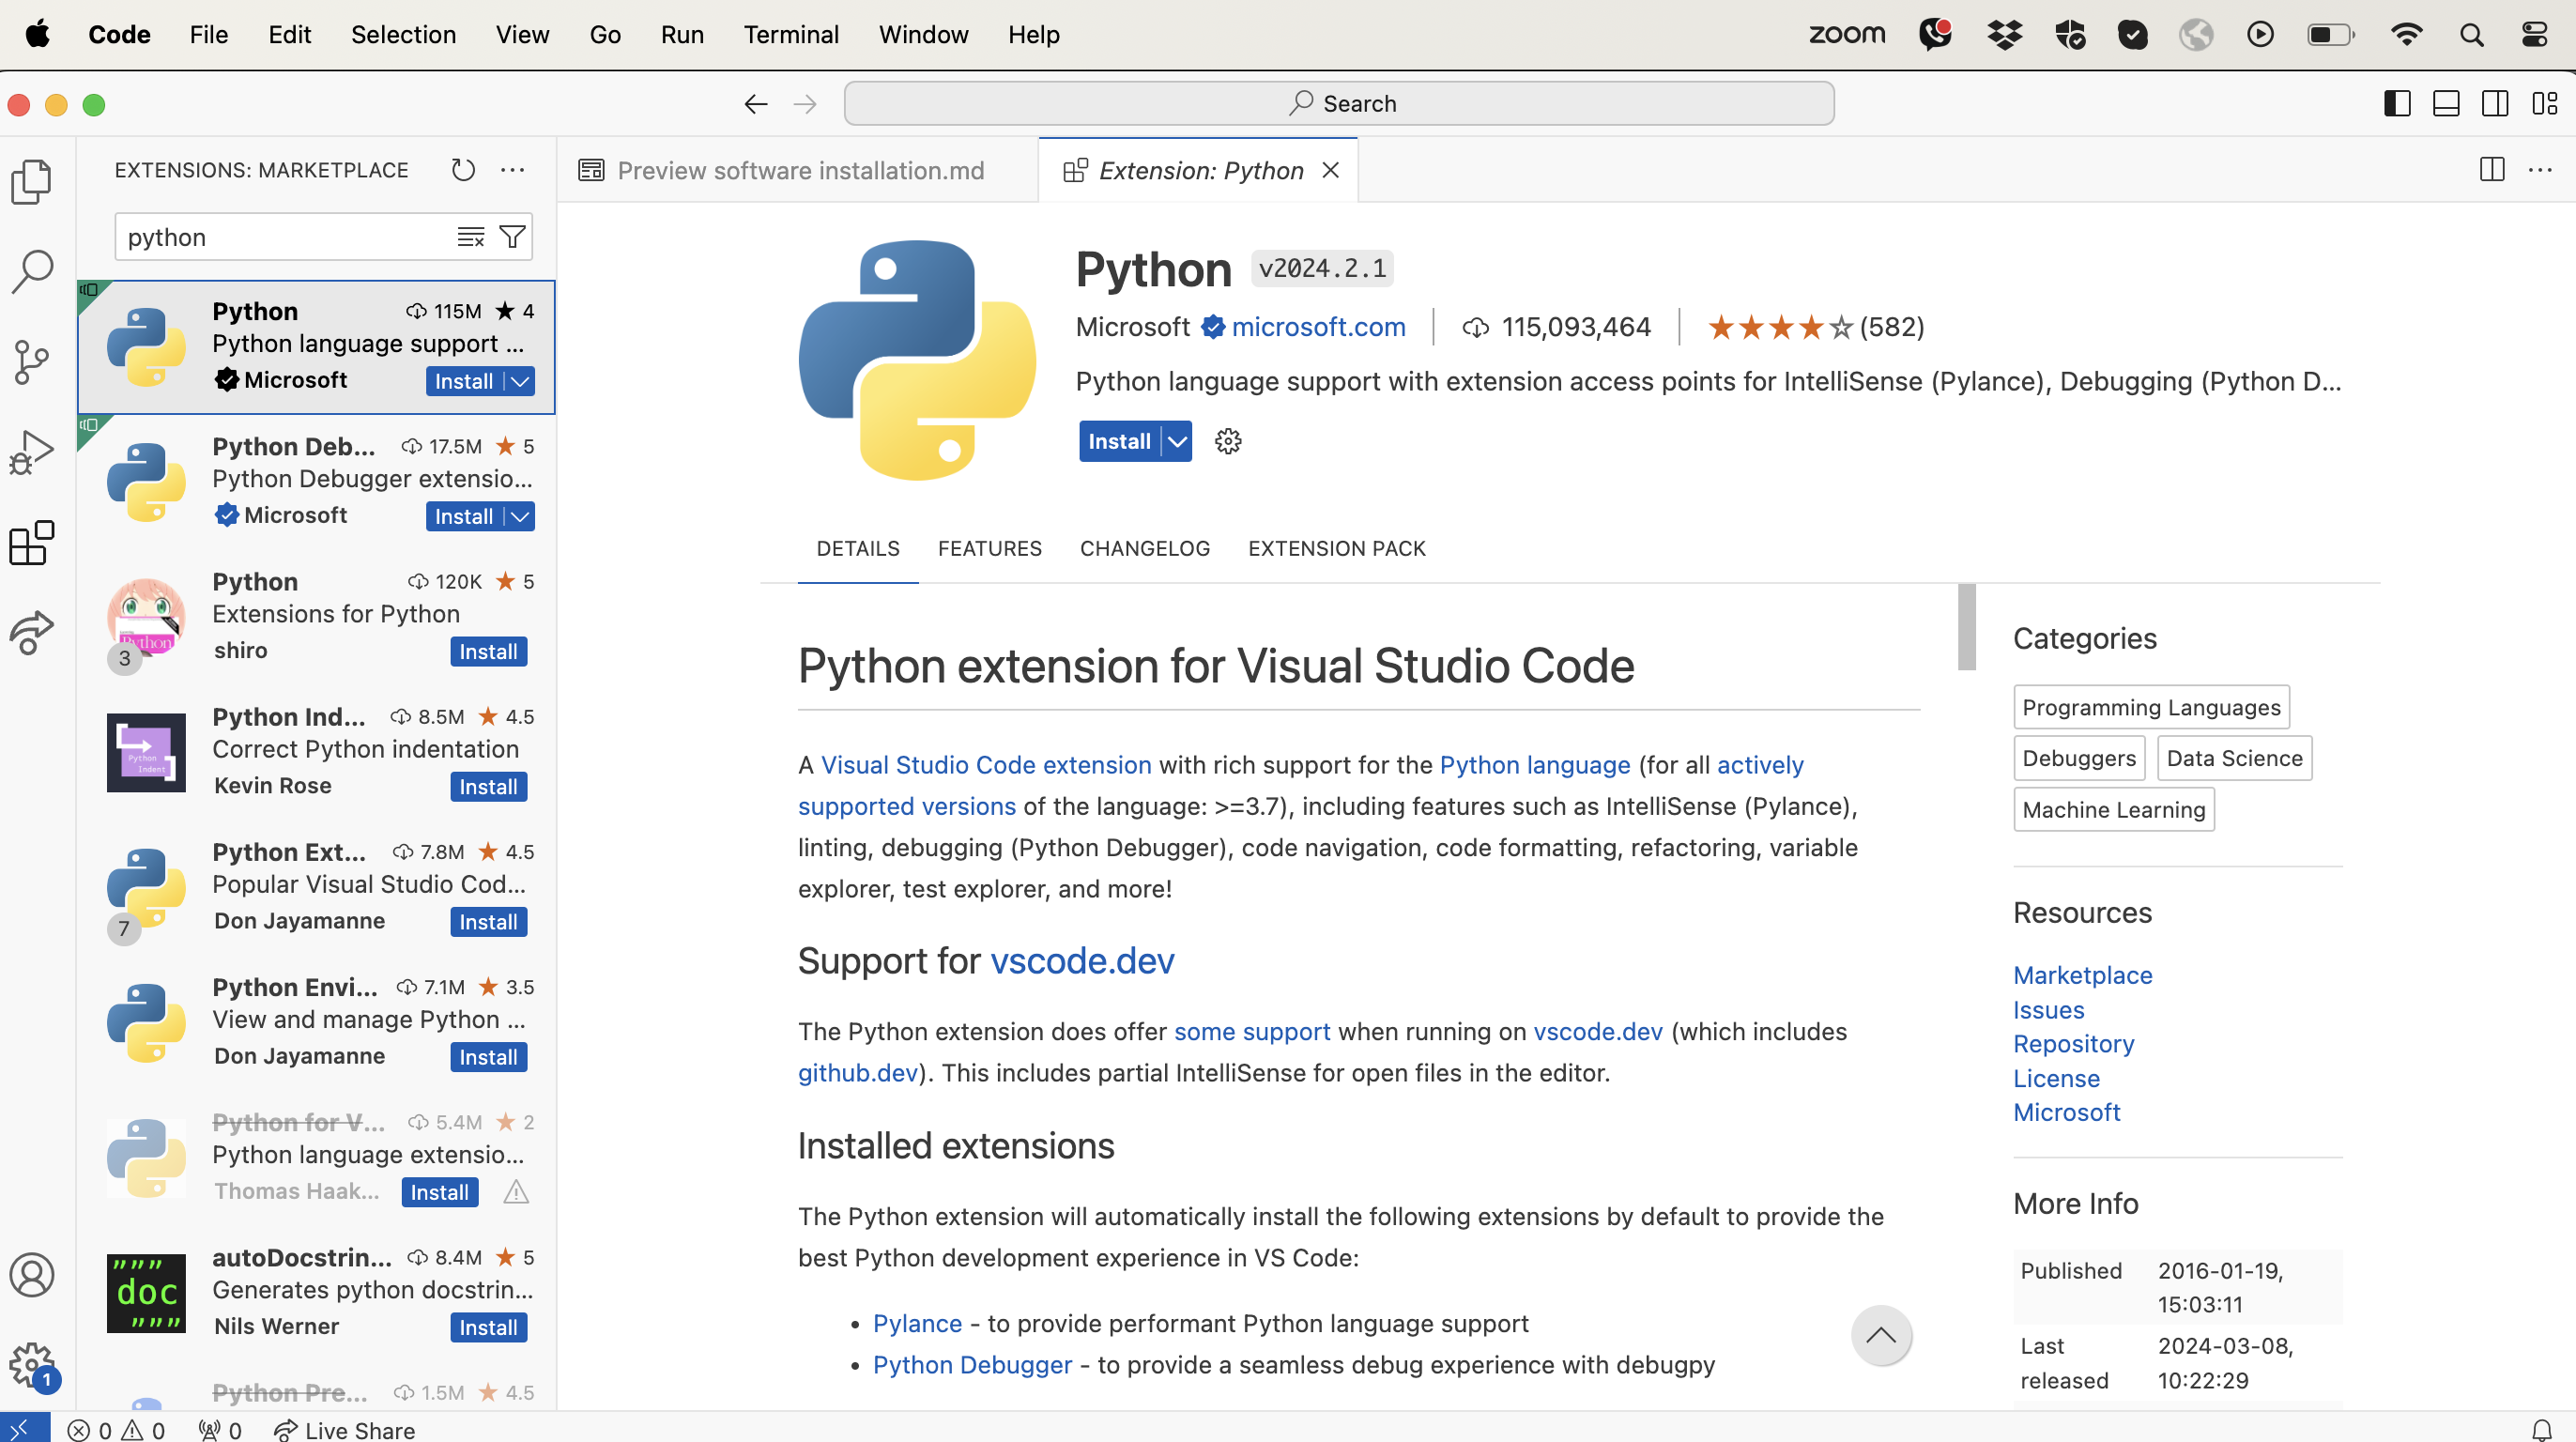 Python extension for VS Code by Microsoft